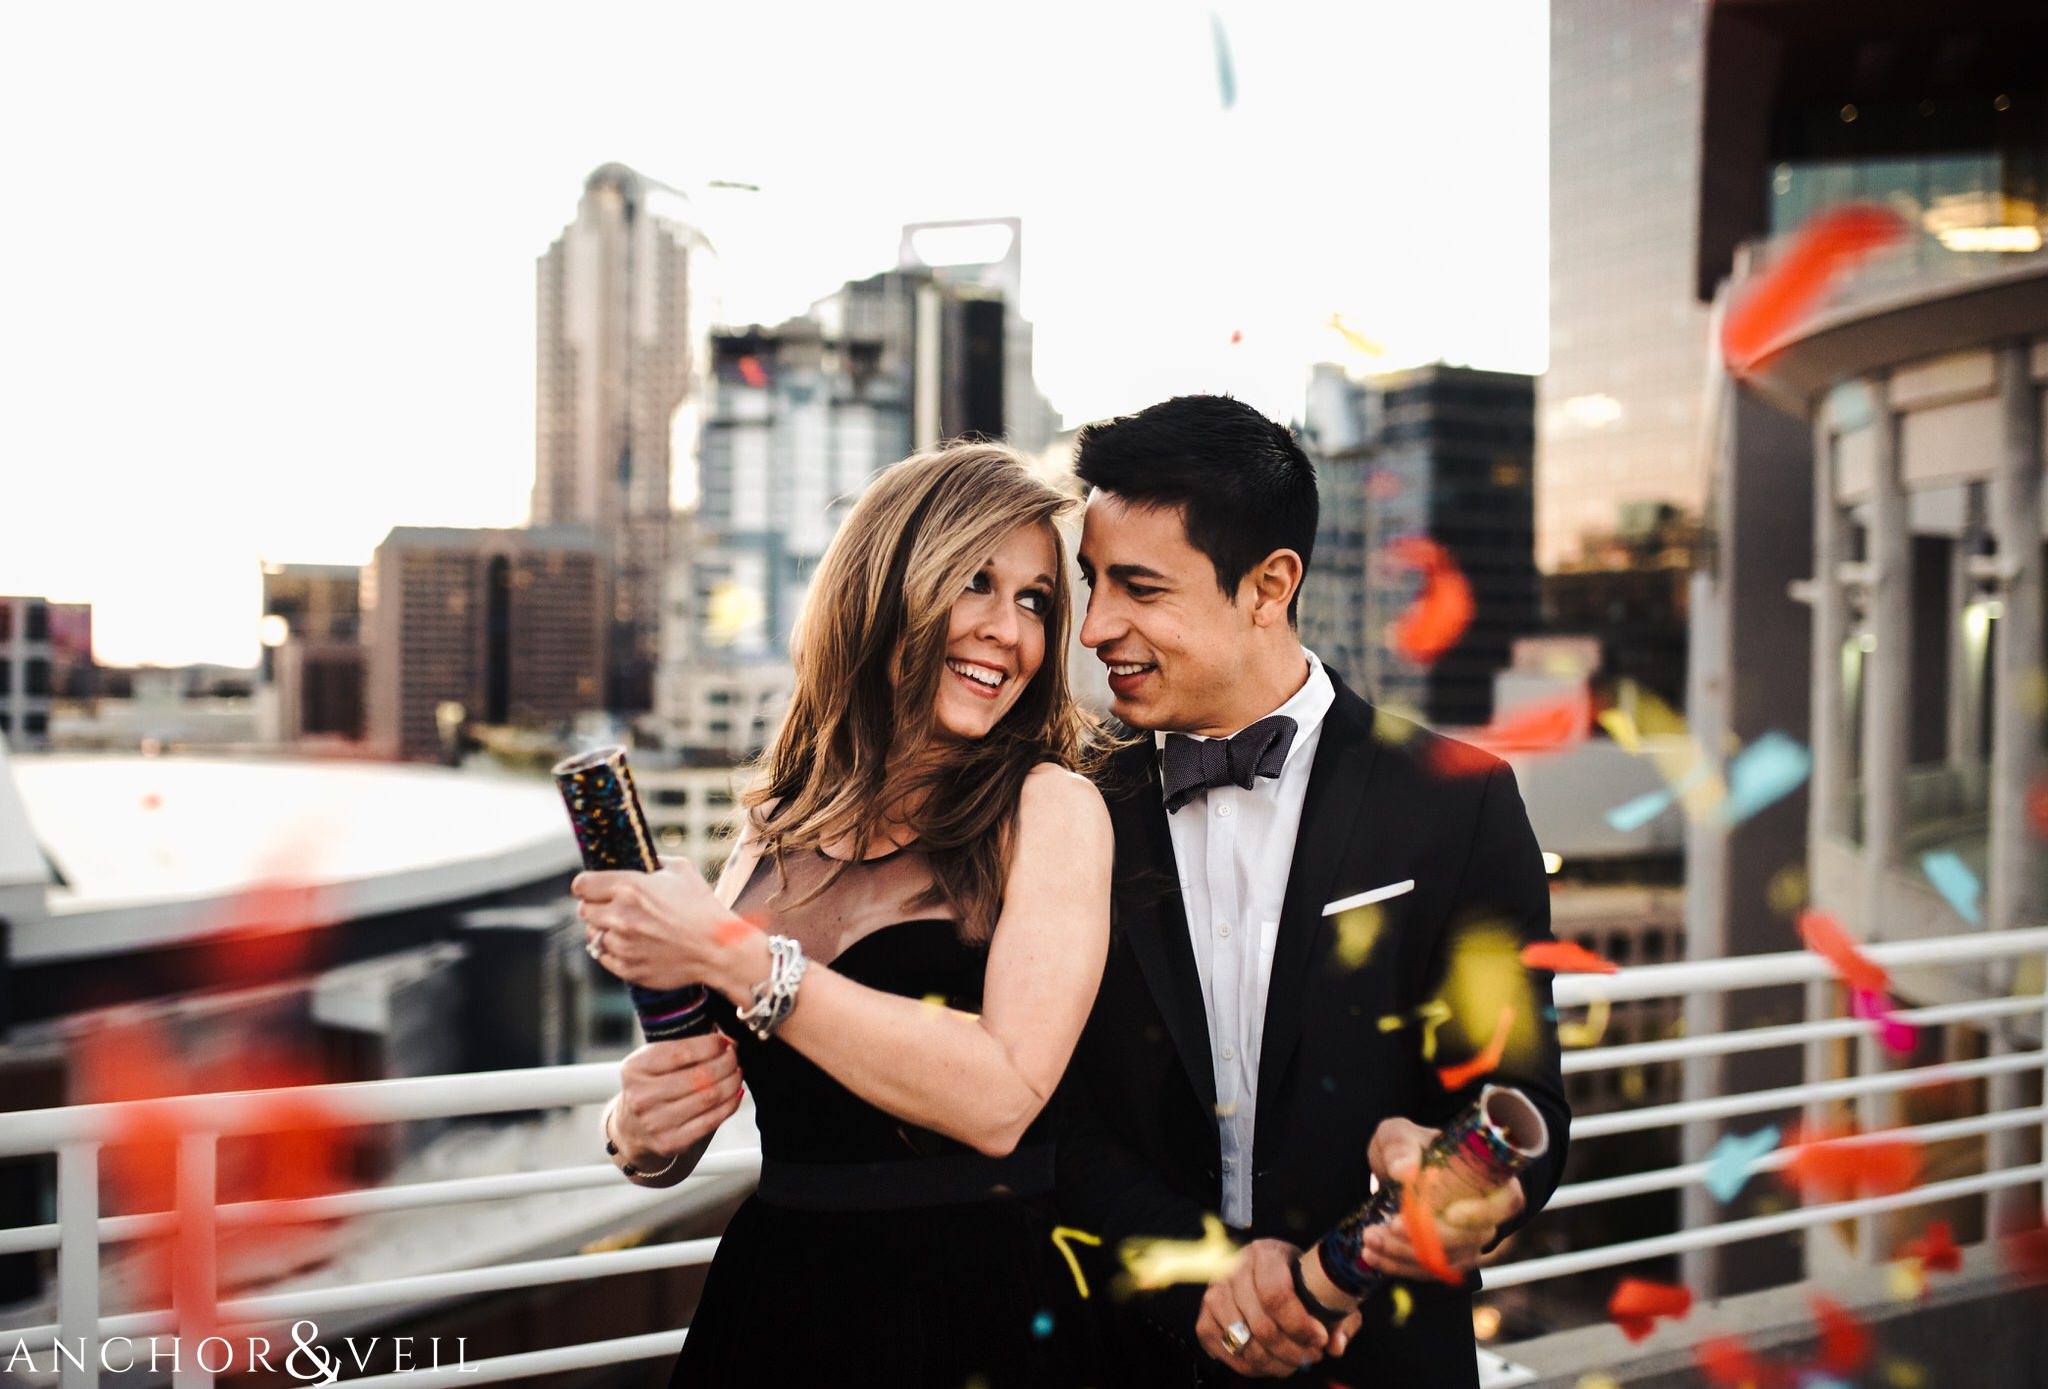 confetti and parking decks During their Uptown Charlotte Engagement Session